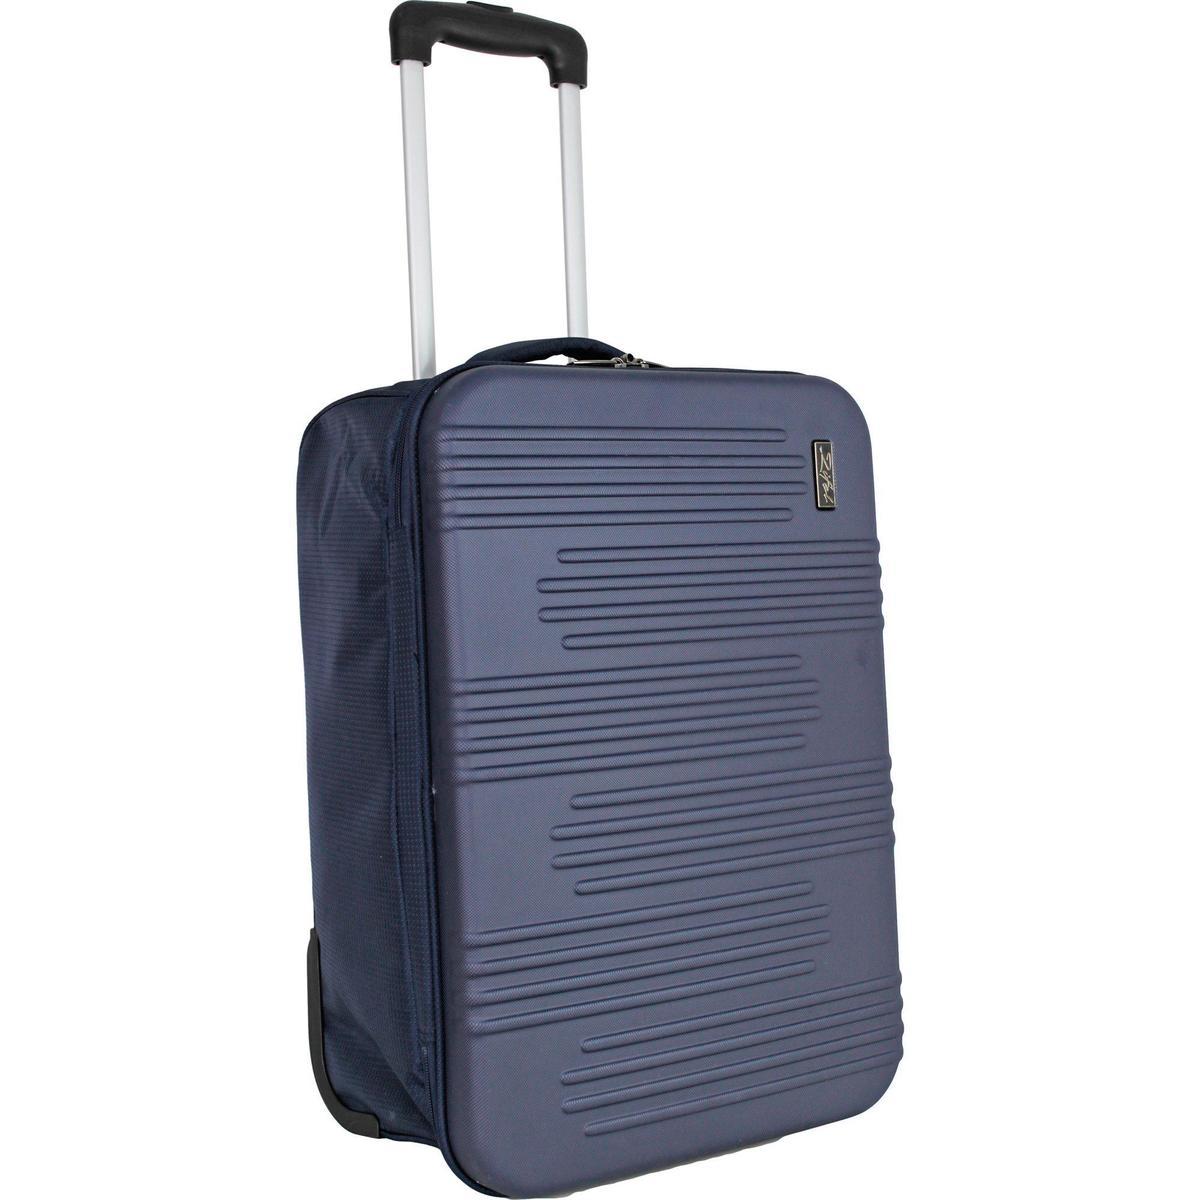 2 Valises trolley pliables XL, Bagagerie